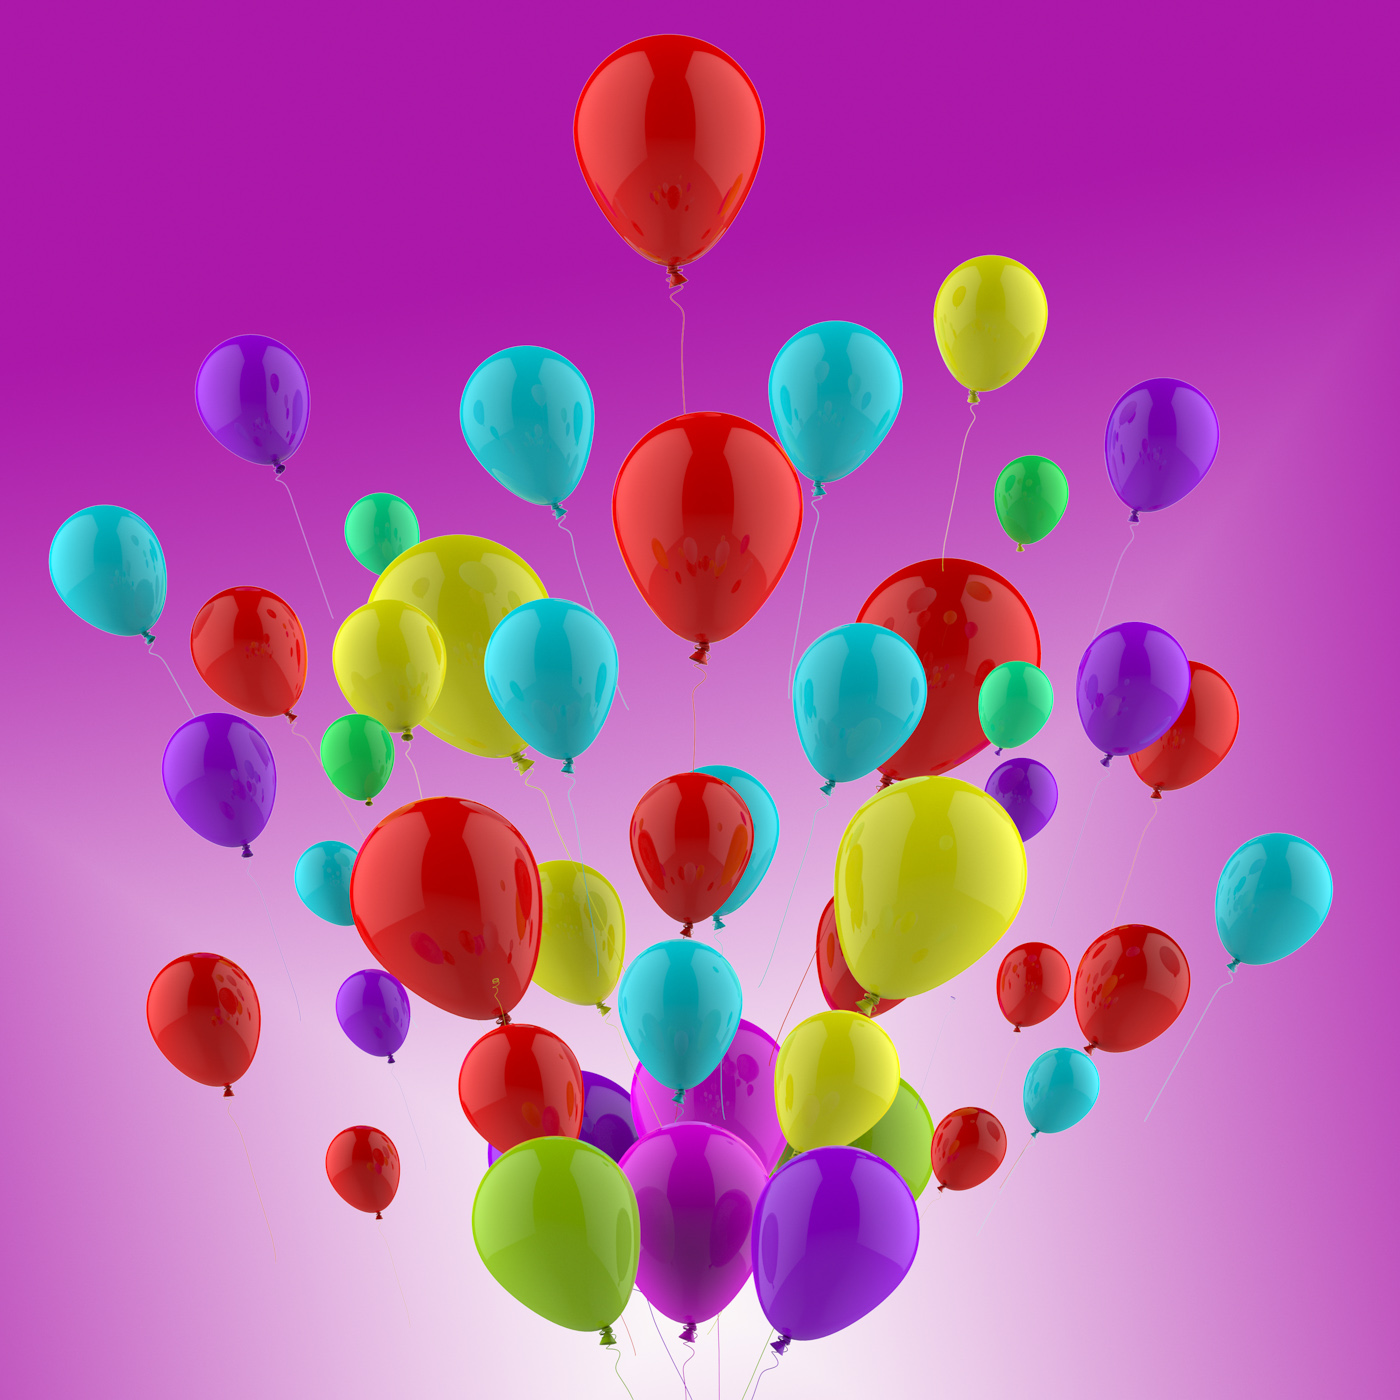 Celebrate Balloons Shows Celebrates Decoration And Cheerful